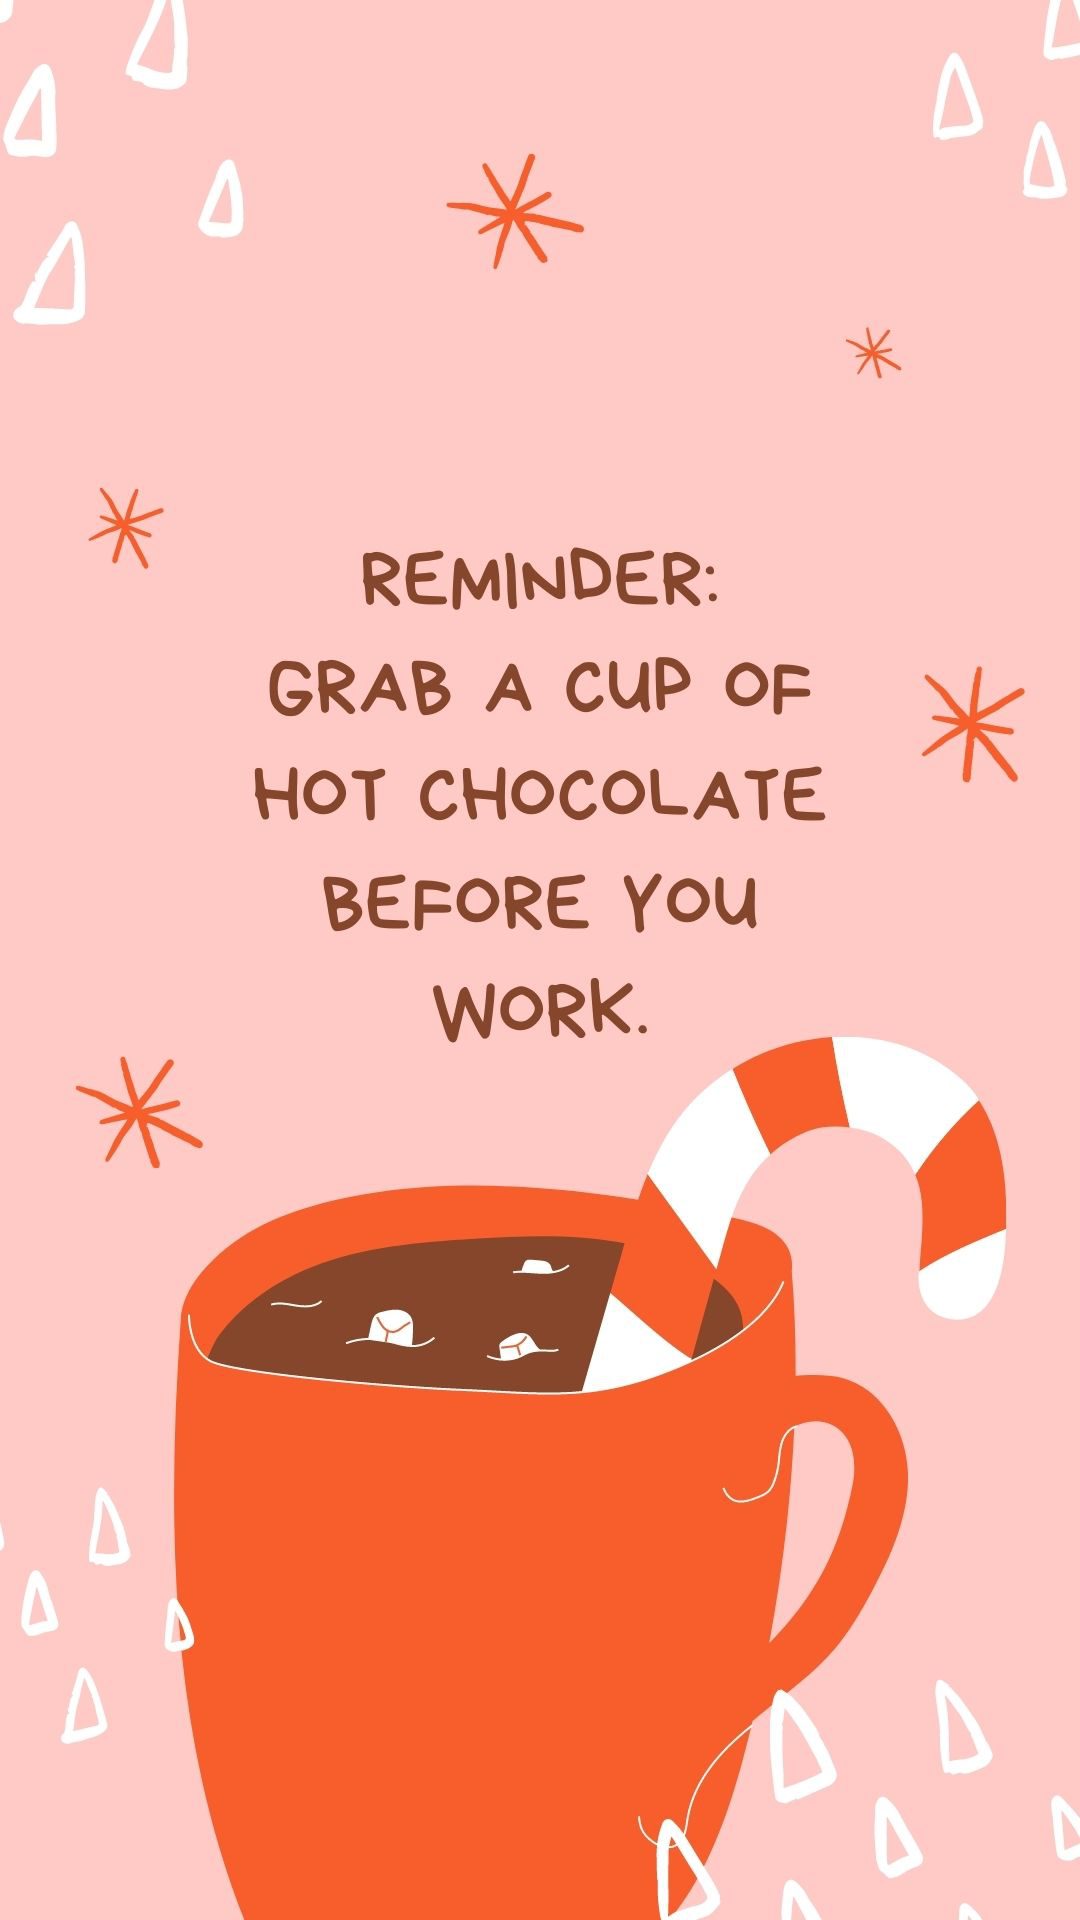 Don't forget to bring the hot chocolate to work iphone wallpaper